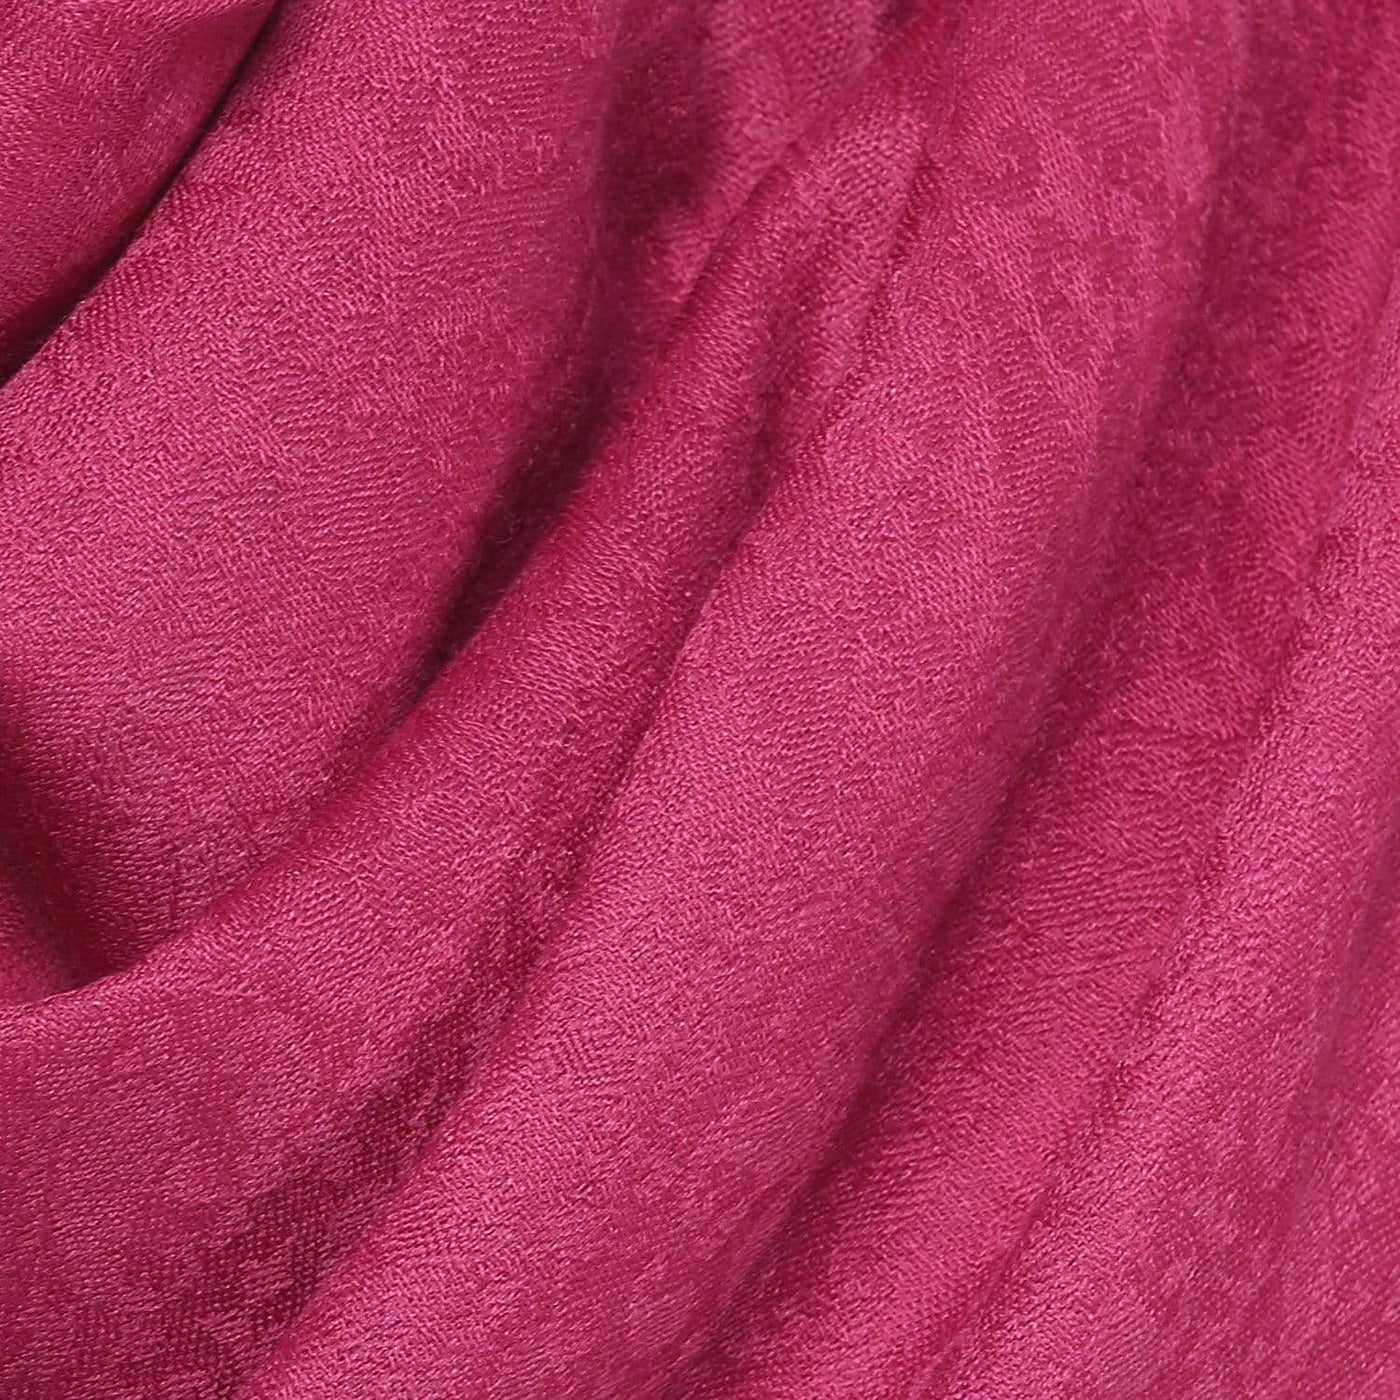 Pashtush Womens Paisley Weave Scarf, Soft And Warm, Luxury Wool - Crazy Pink